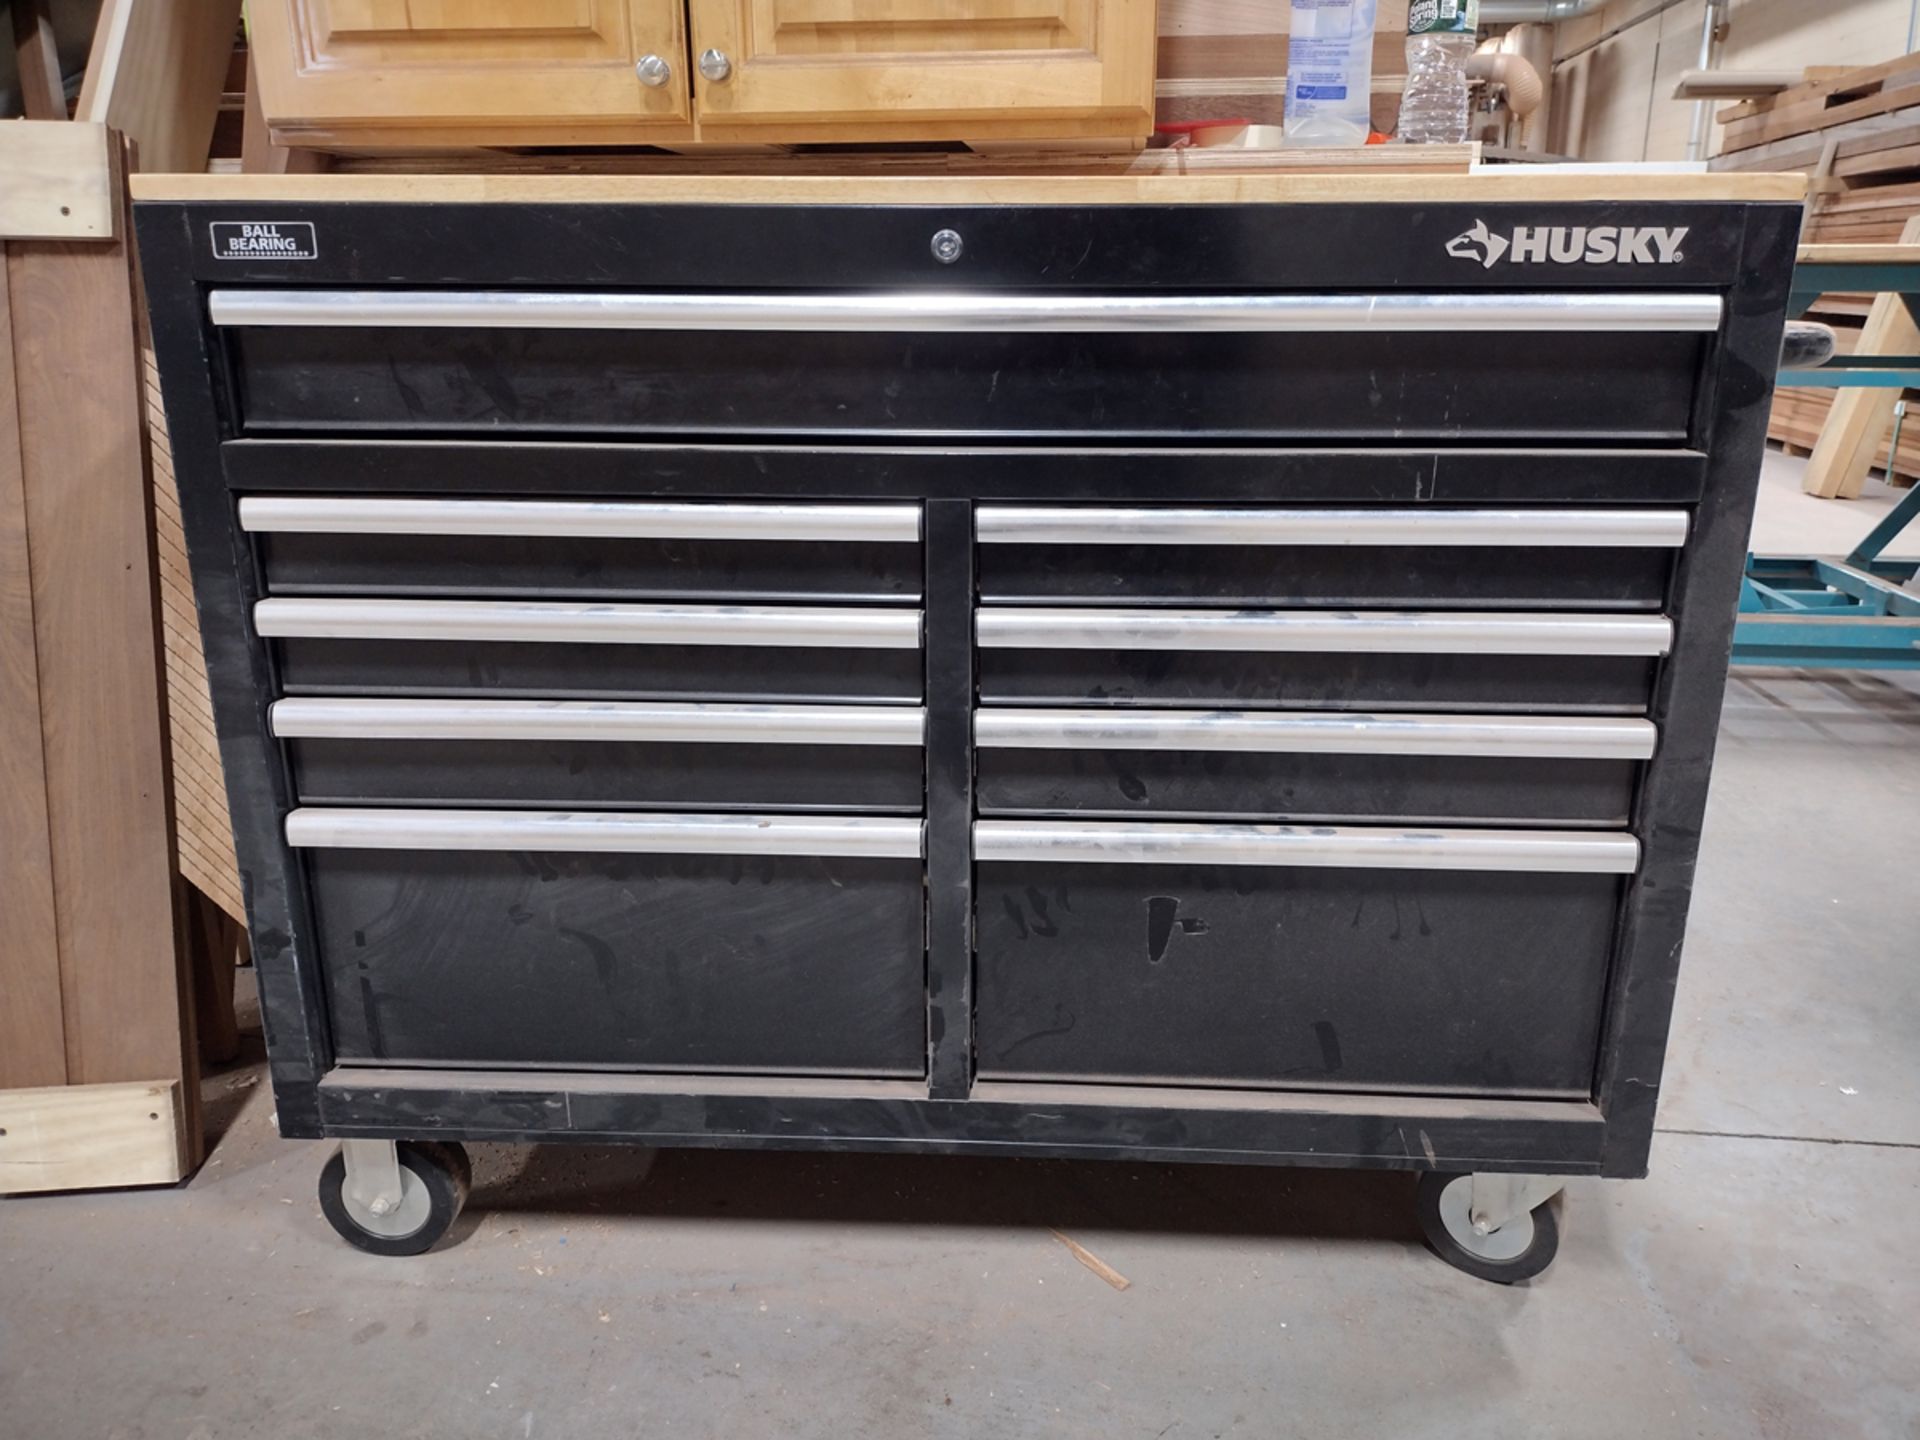 Husky 9 Drawer Portable Tool Chest w/Contents - Image 2 of 3